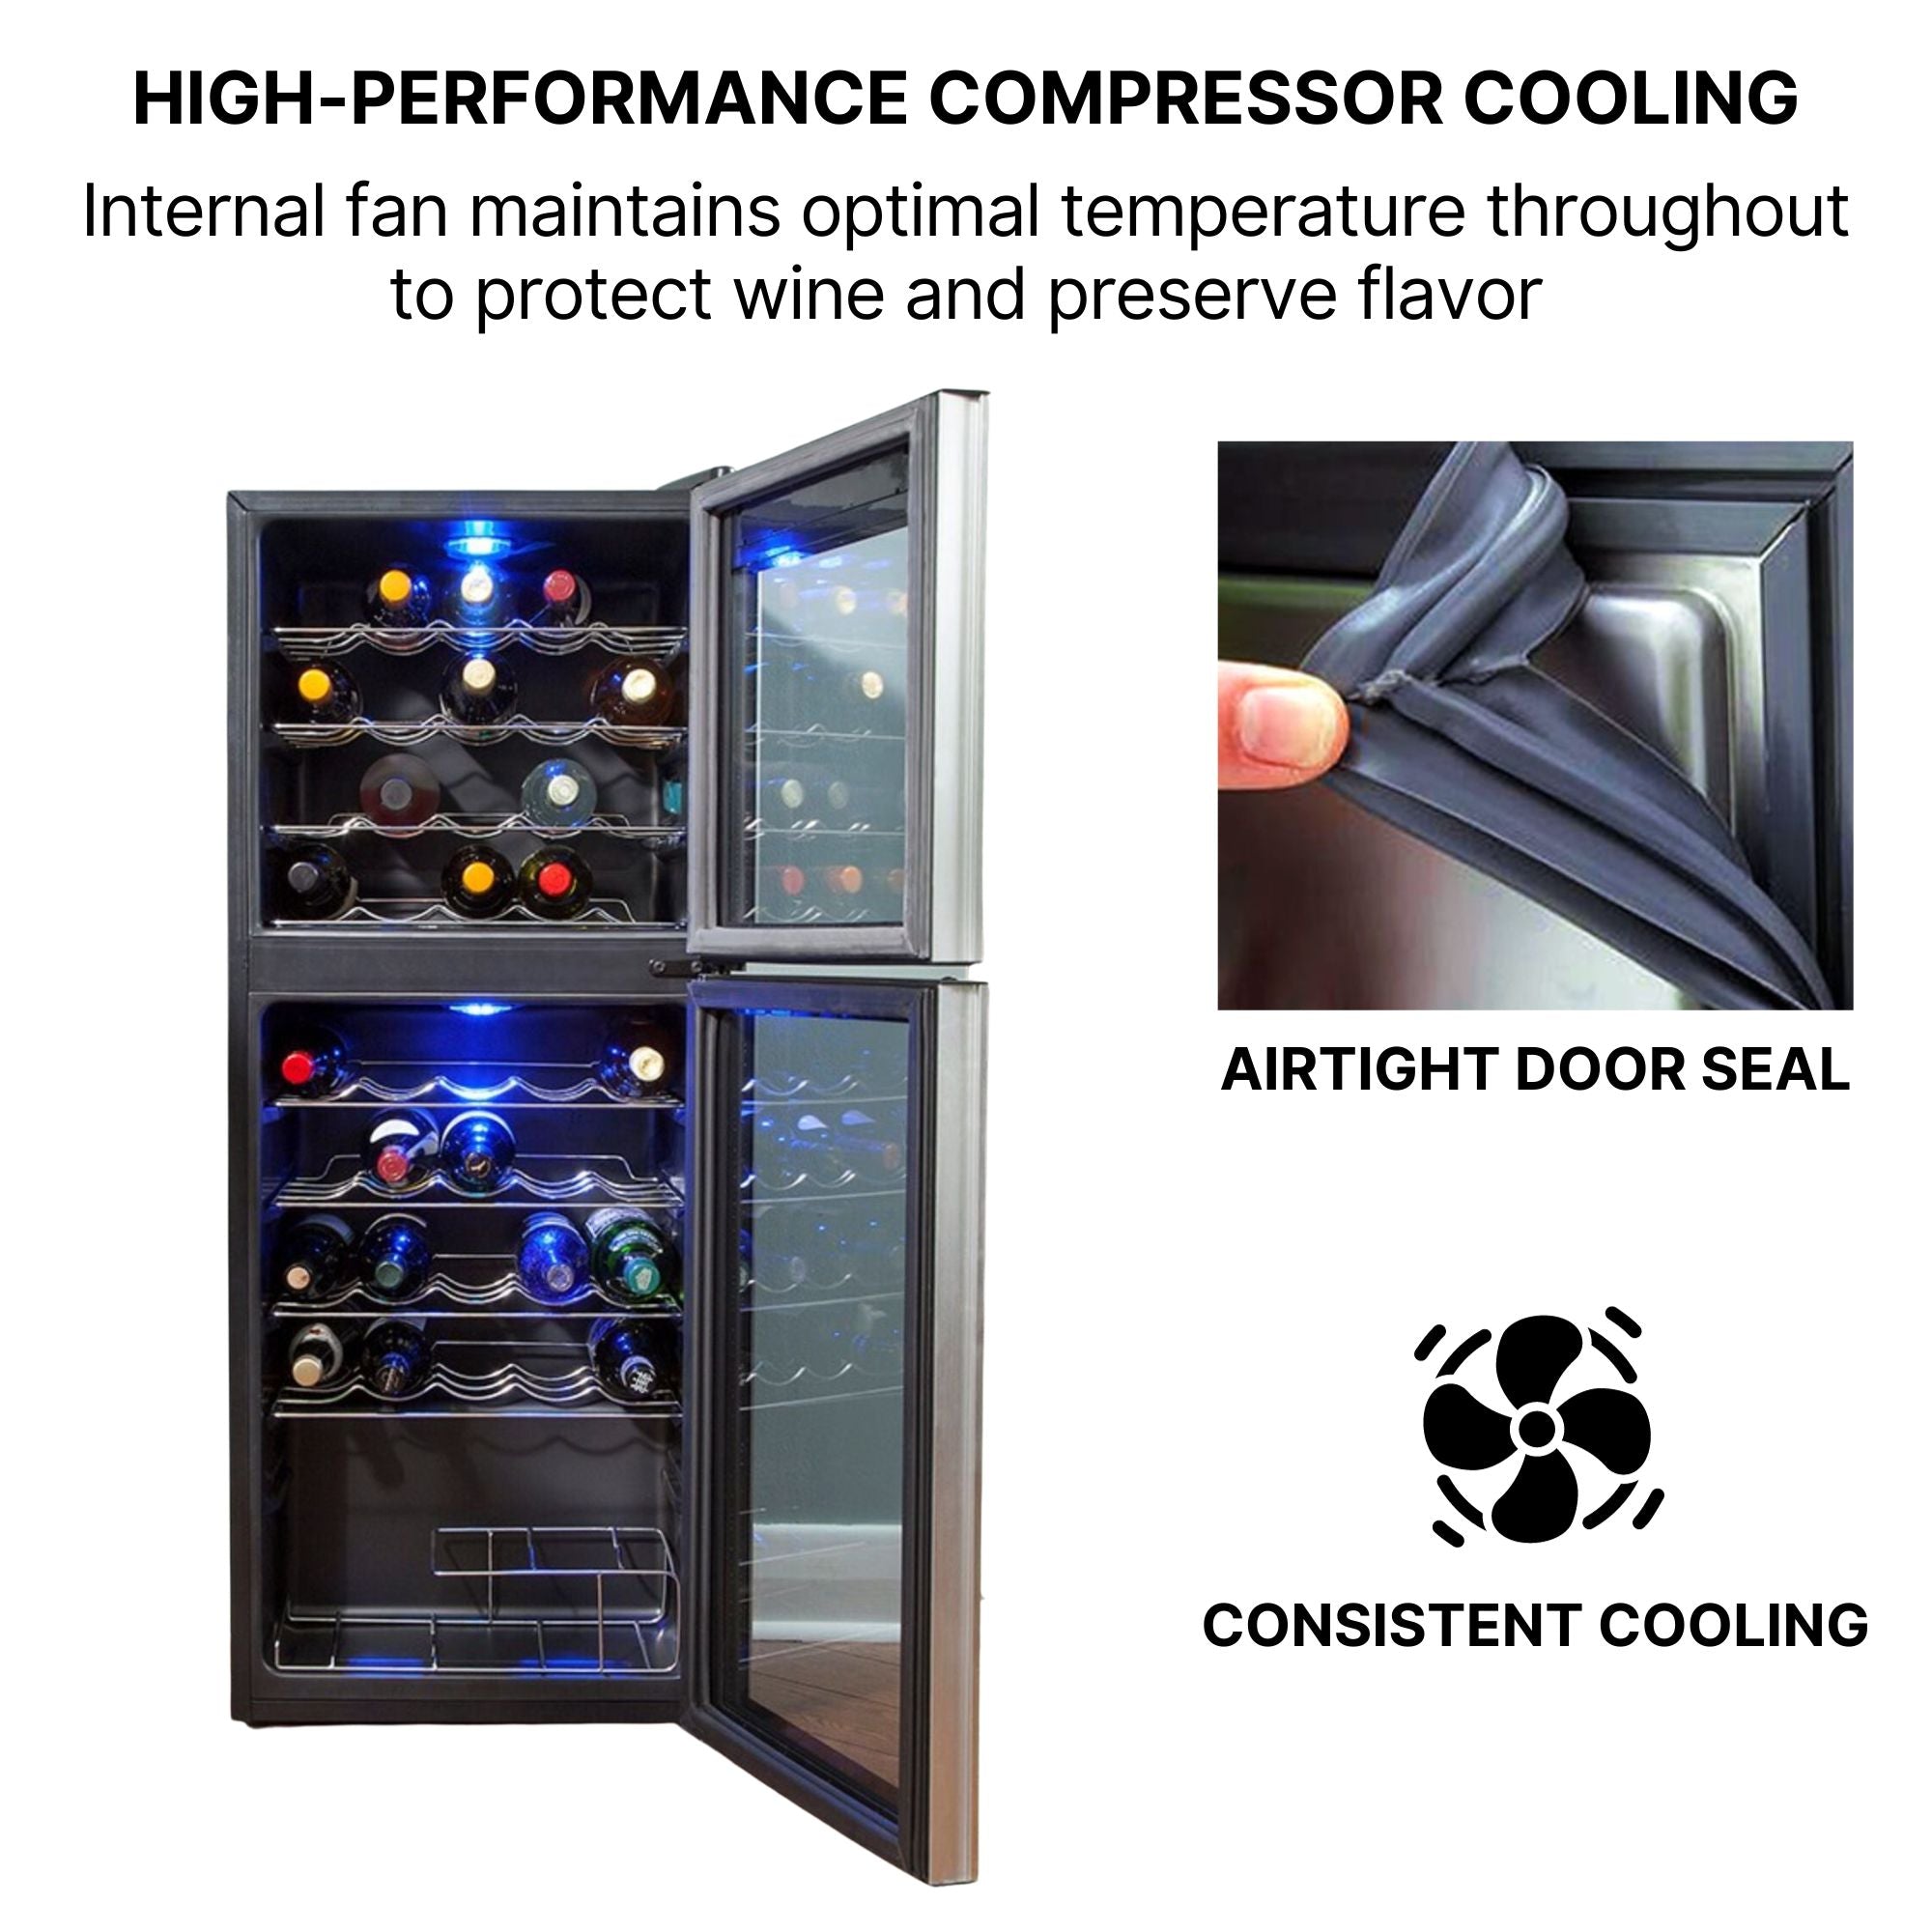 Koolatron 45 bottle dual zone freestanding wine fridge, partly open. To the right is an inset closeup of a person's finger bending the rubber door gasket, captioned, "Airtight door seal," and a fan icon captioned, "consistent cooling." Text above reads, "High-performance compressor cooling: Internal fan maintains optimal temperature throughout both chambers to protect wine and preserve flavor"